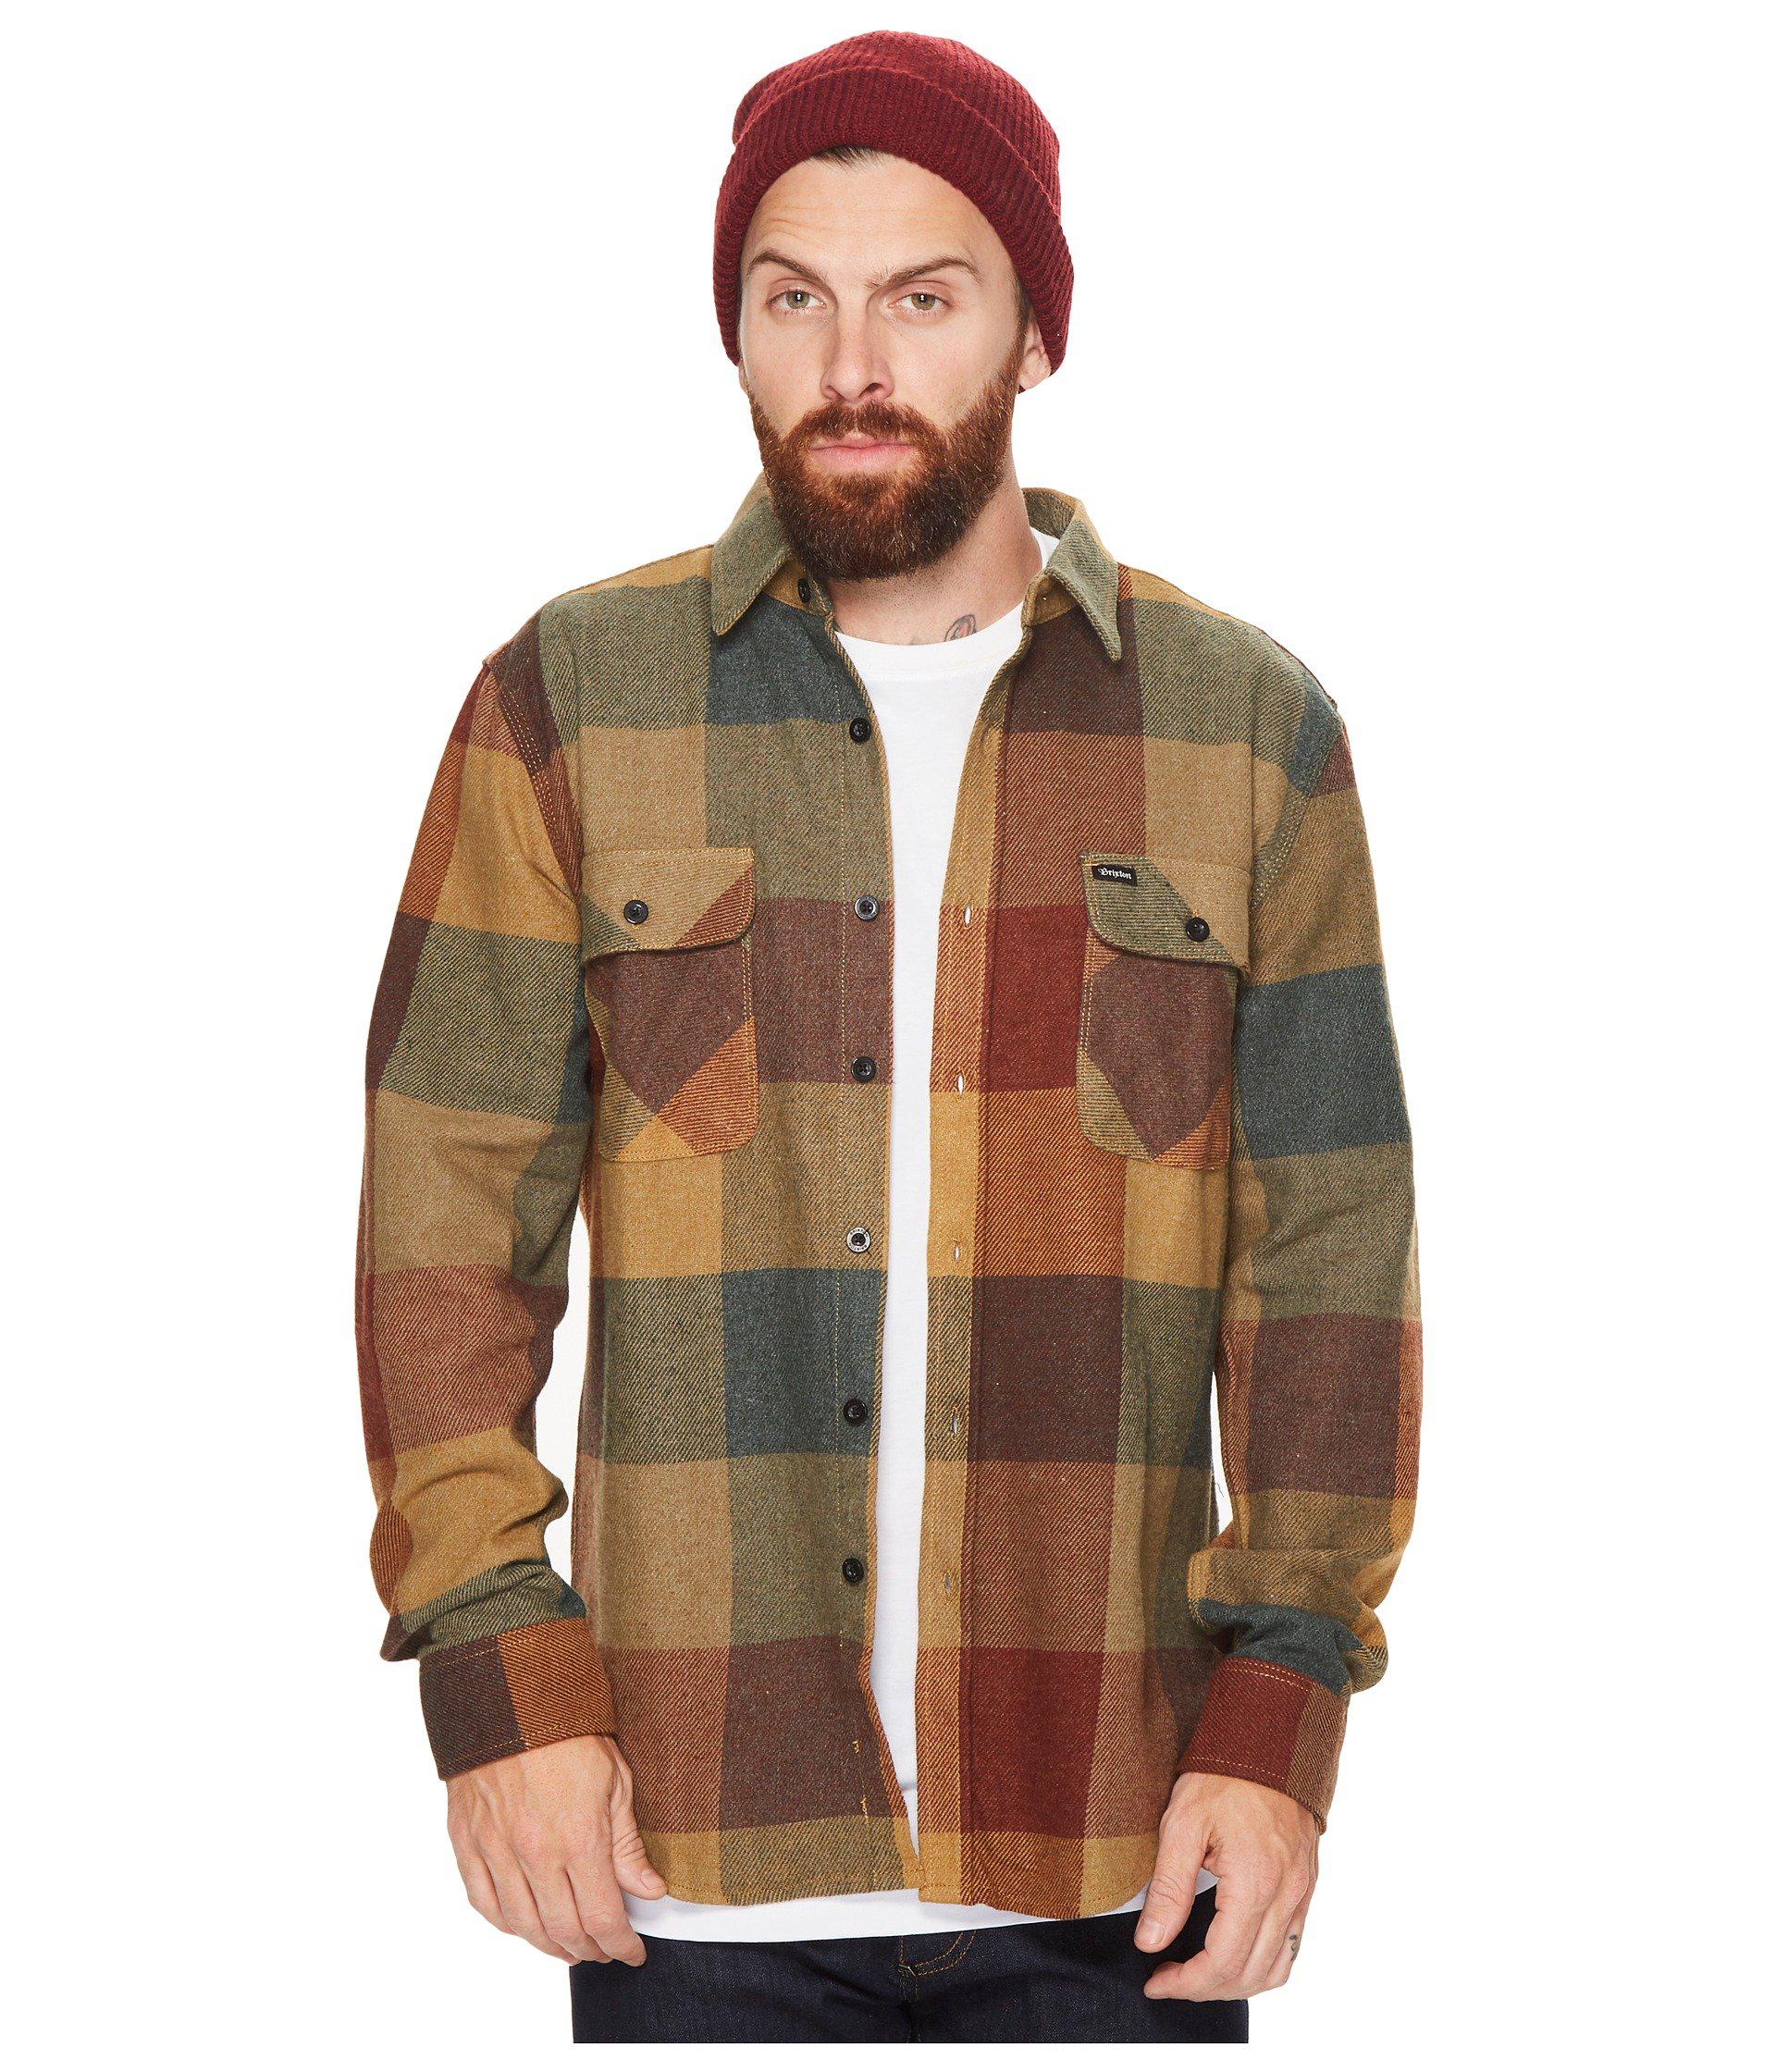 Lyst - Brixton Bowery Long Sleeve Flannel in Brown for Men